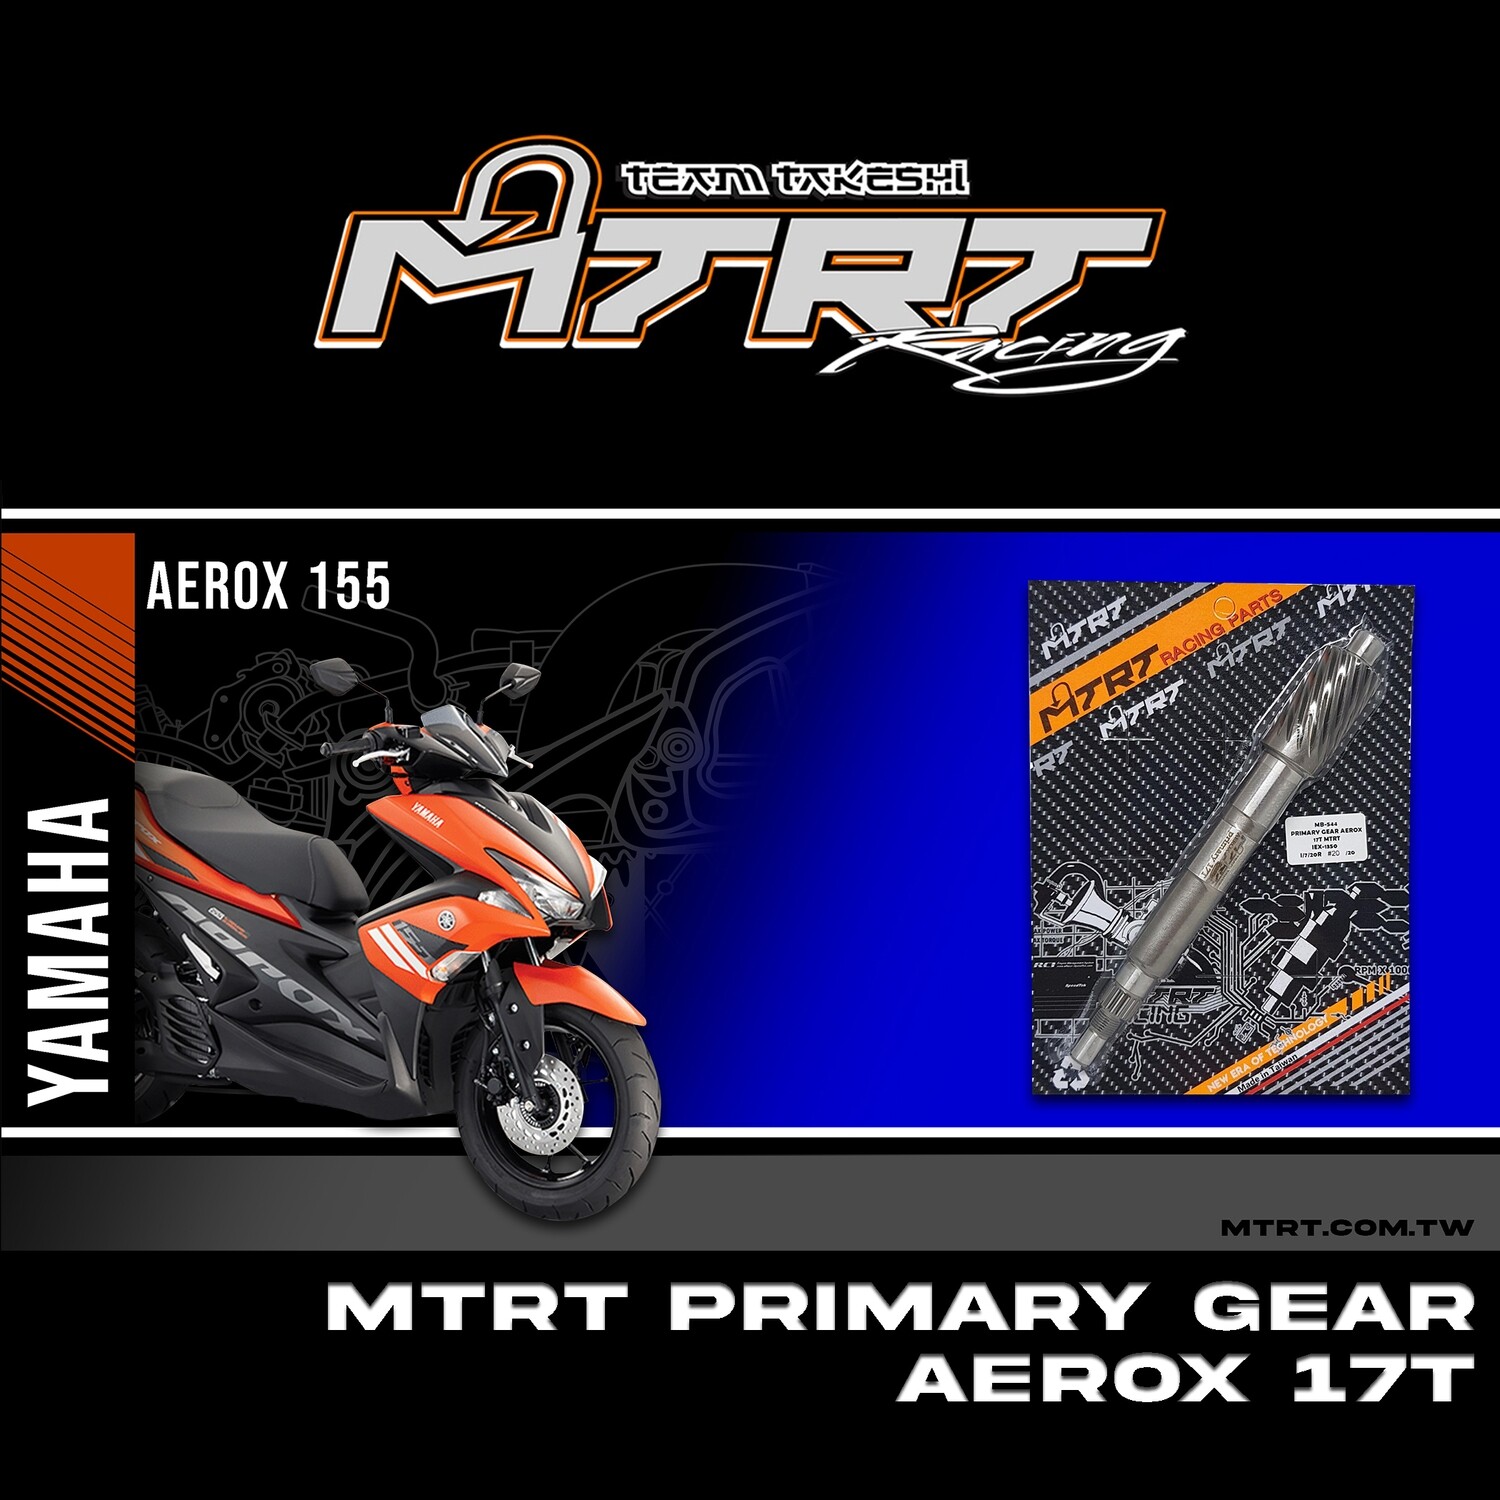 MTRT PRIMARY GEAR AEROX155/NMAX 17T FOR 56T